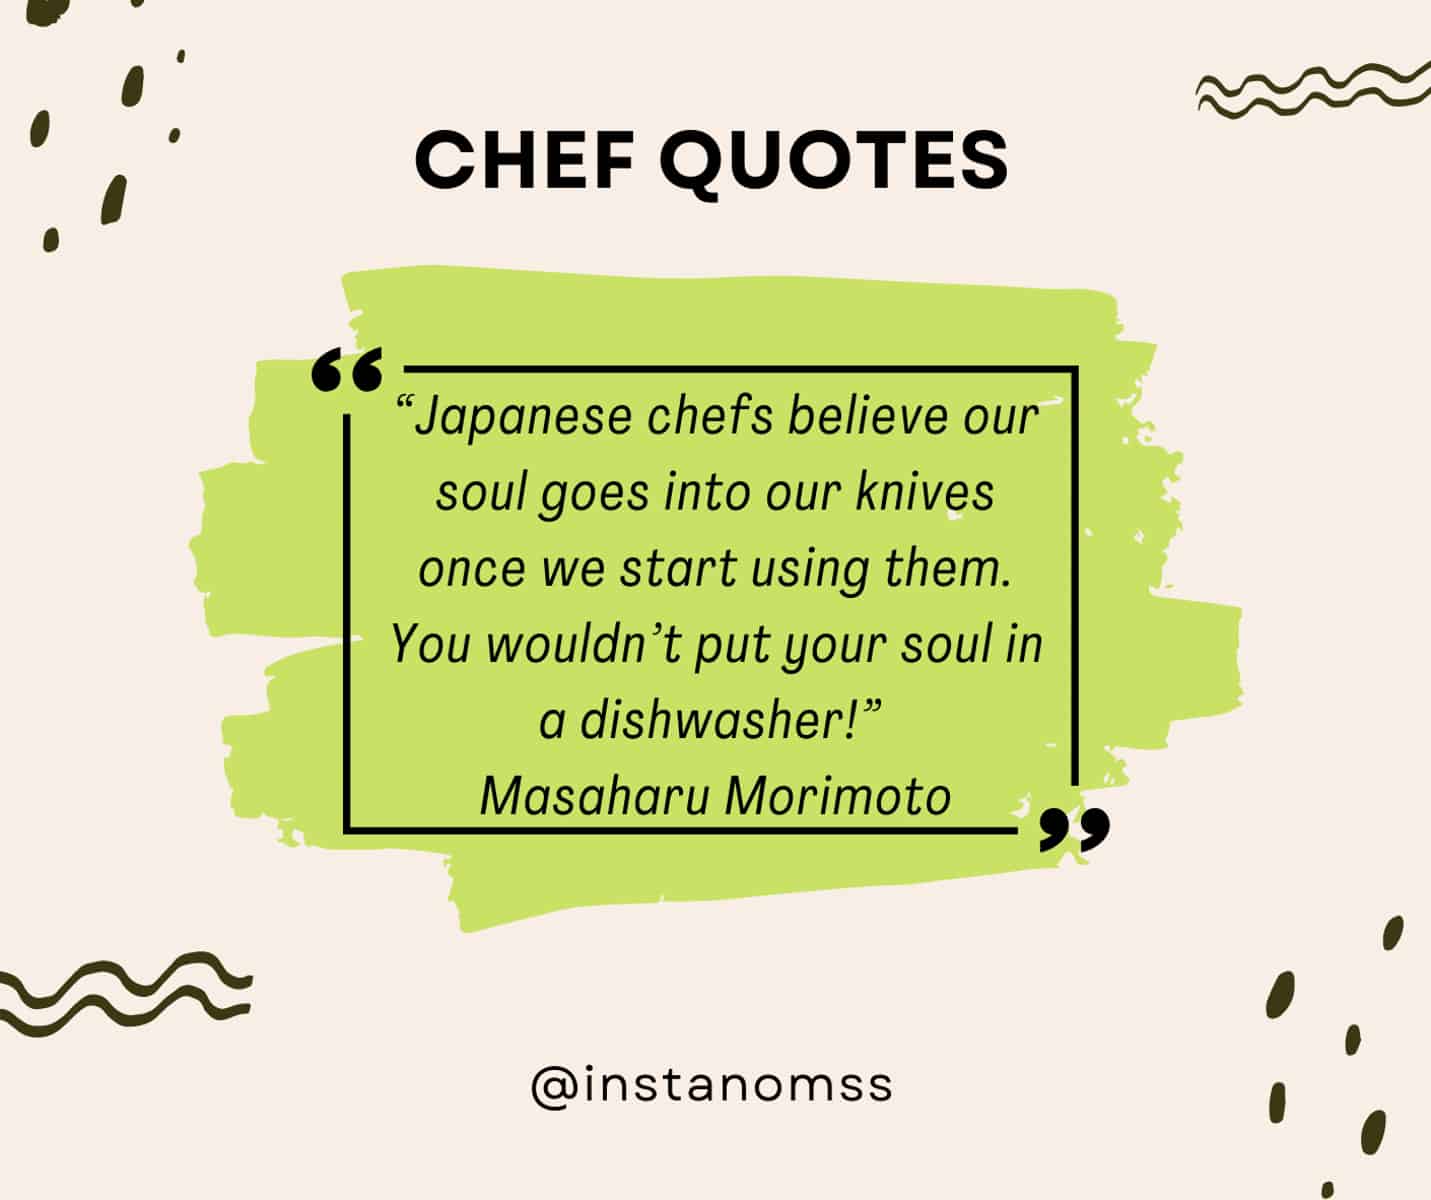 “Japanese chefs believe our soul goes into our knives once we start using them. You wouldn’t put your soul in a dishwasher!” Masaharu Morimoto